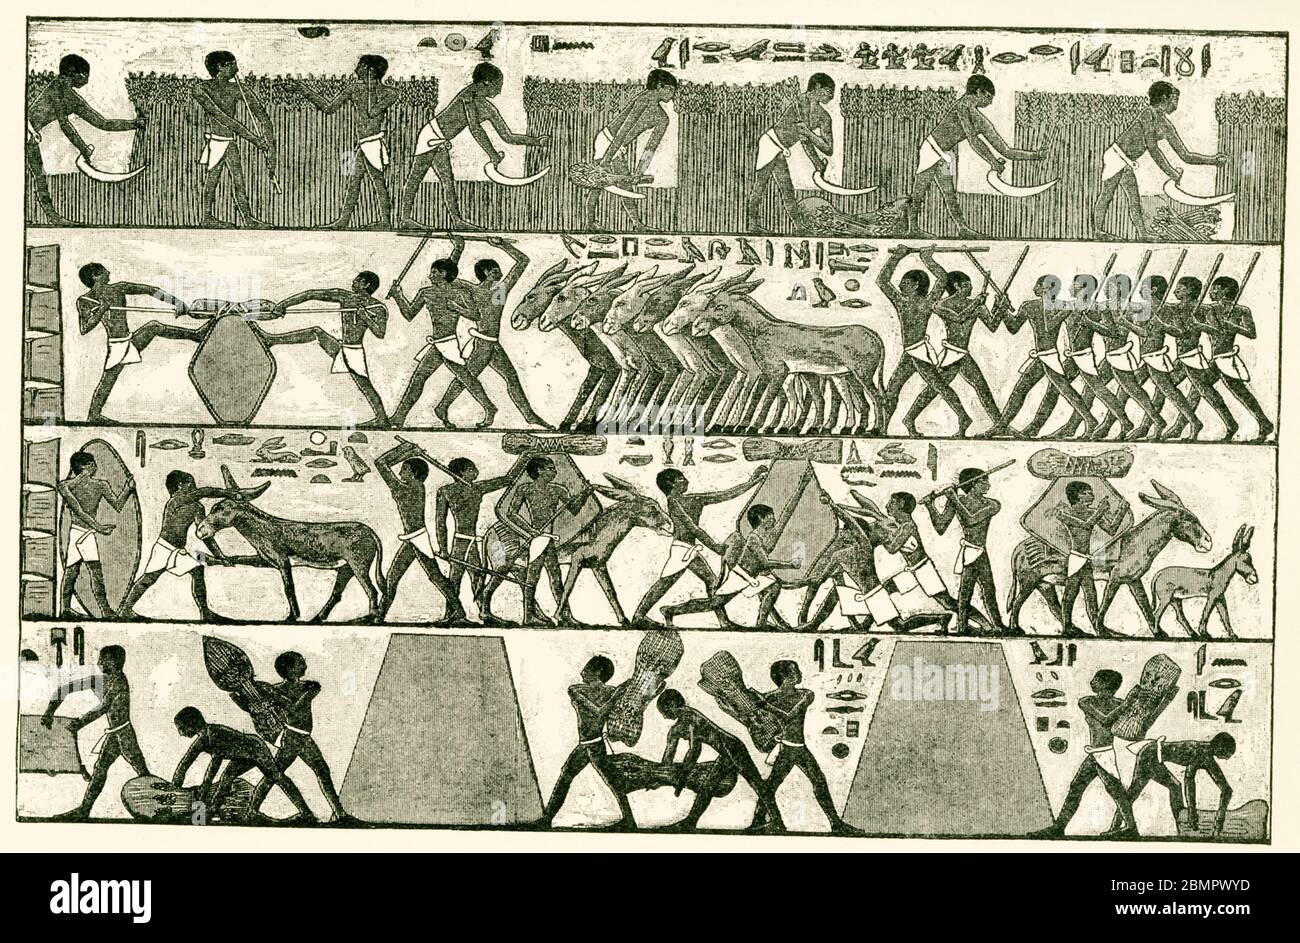 The caption for this image reads: The Cutting and Carrying of the Harvest.  Drawn by Faucher-Gudin, from a photograph by Dumichen, Resultate, vol. i, pl x. The book was written by Gaston Maspero, a French Egyptologist and director general of excavations and antiquities for the Egyptian government. Accompanying the text are many drawings by the French artist Henri Faucher-Gudin, such as this one of ancient Egyptians cutting and carrying the harvest. Many of these drawings are found in ancient Egyptian tombs. Stock Photo